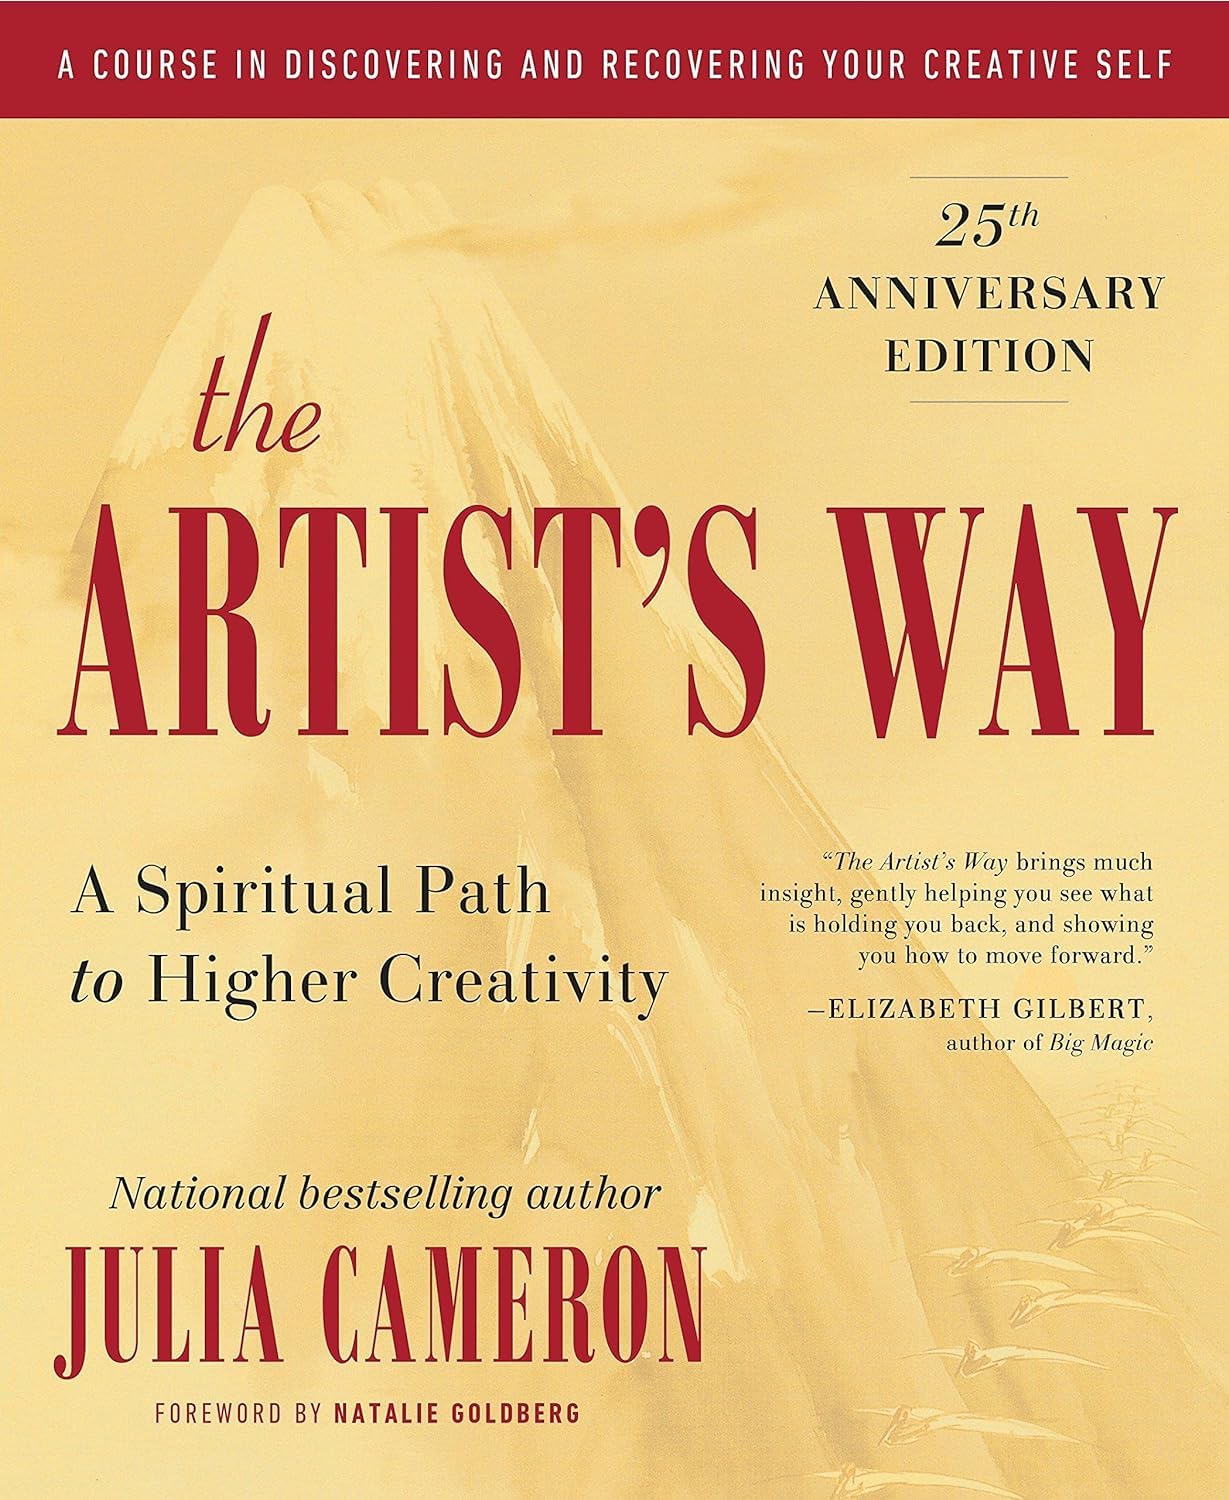 The Artists Way by Julia Cameron